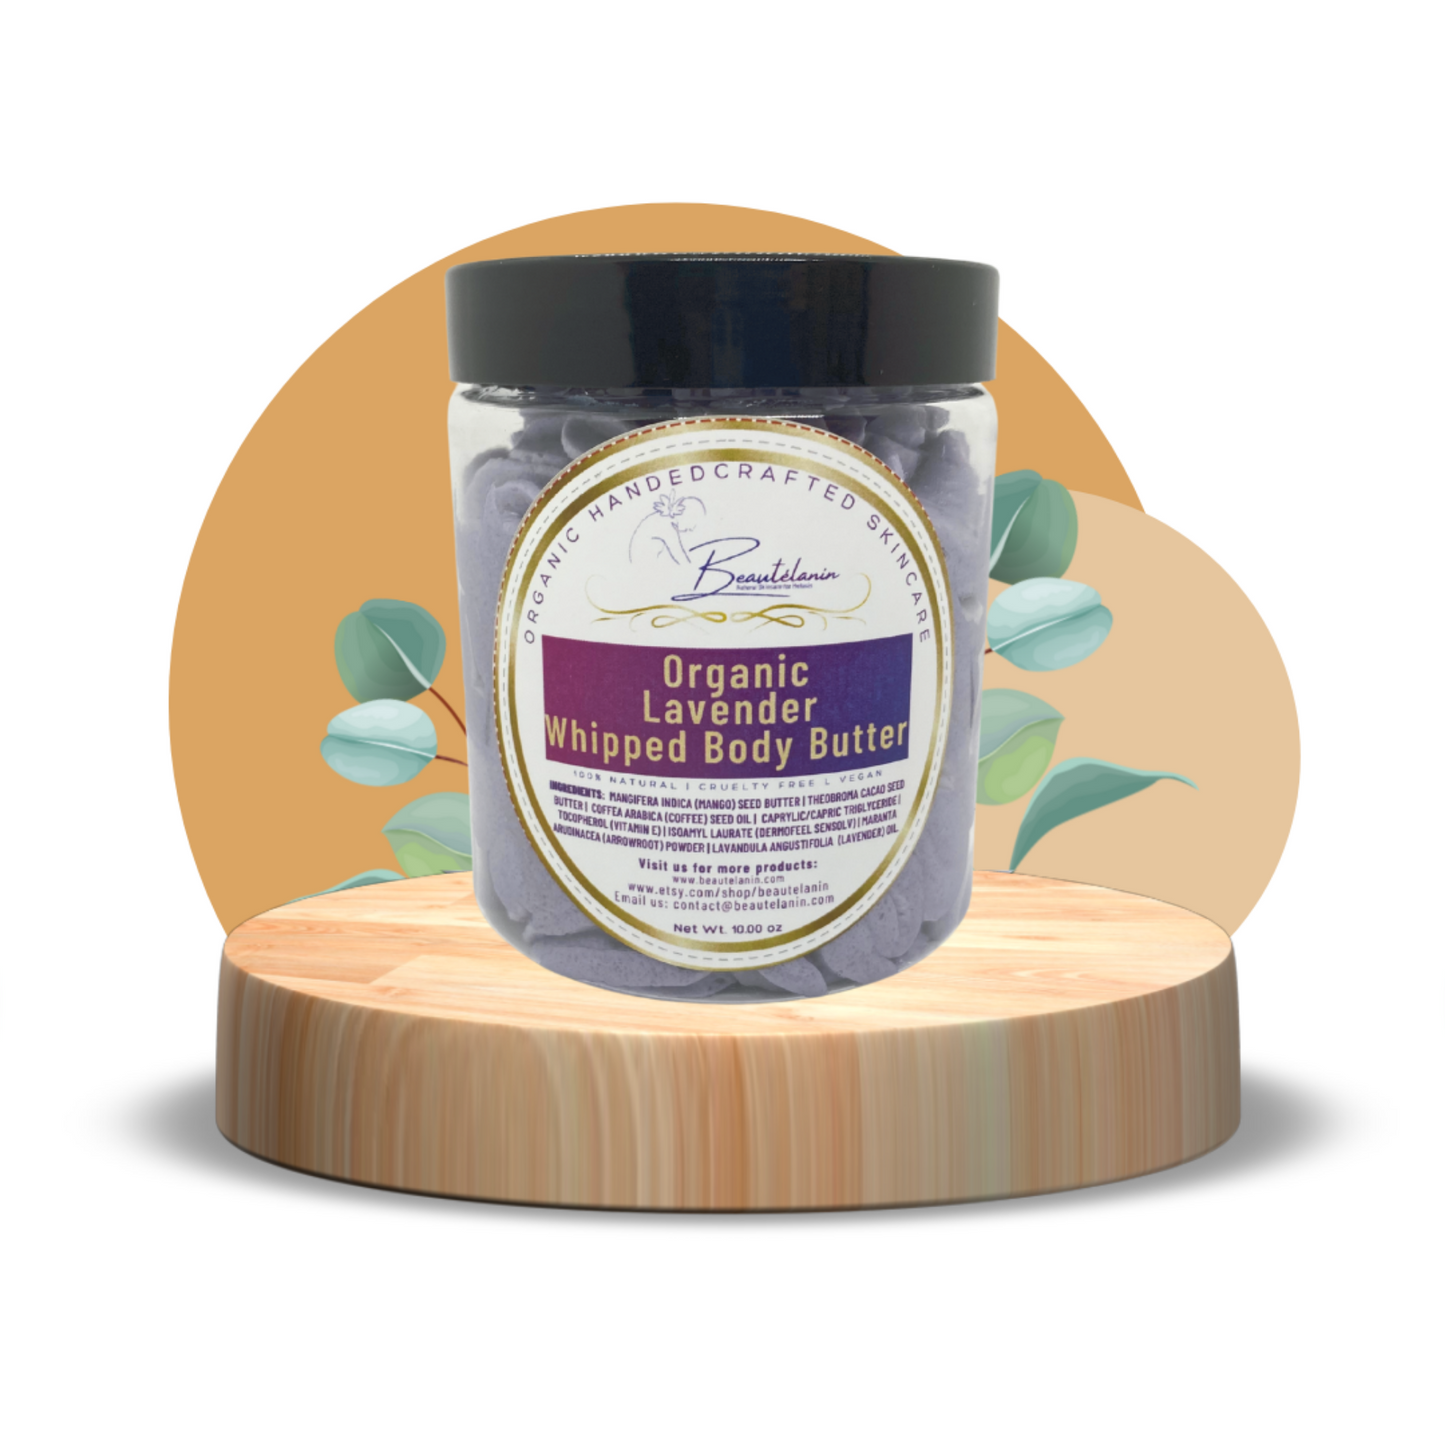 Organic Lavender Whipped Body Butter